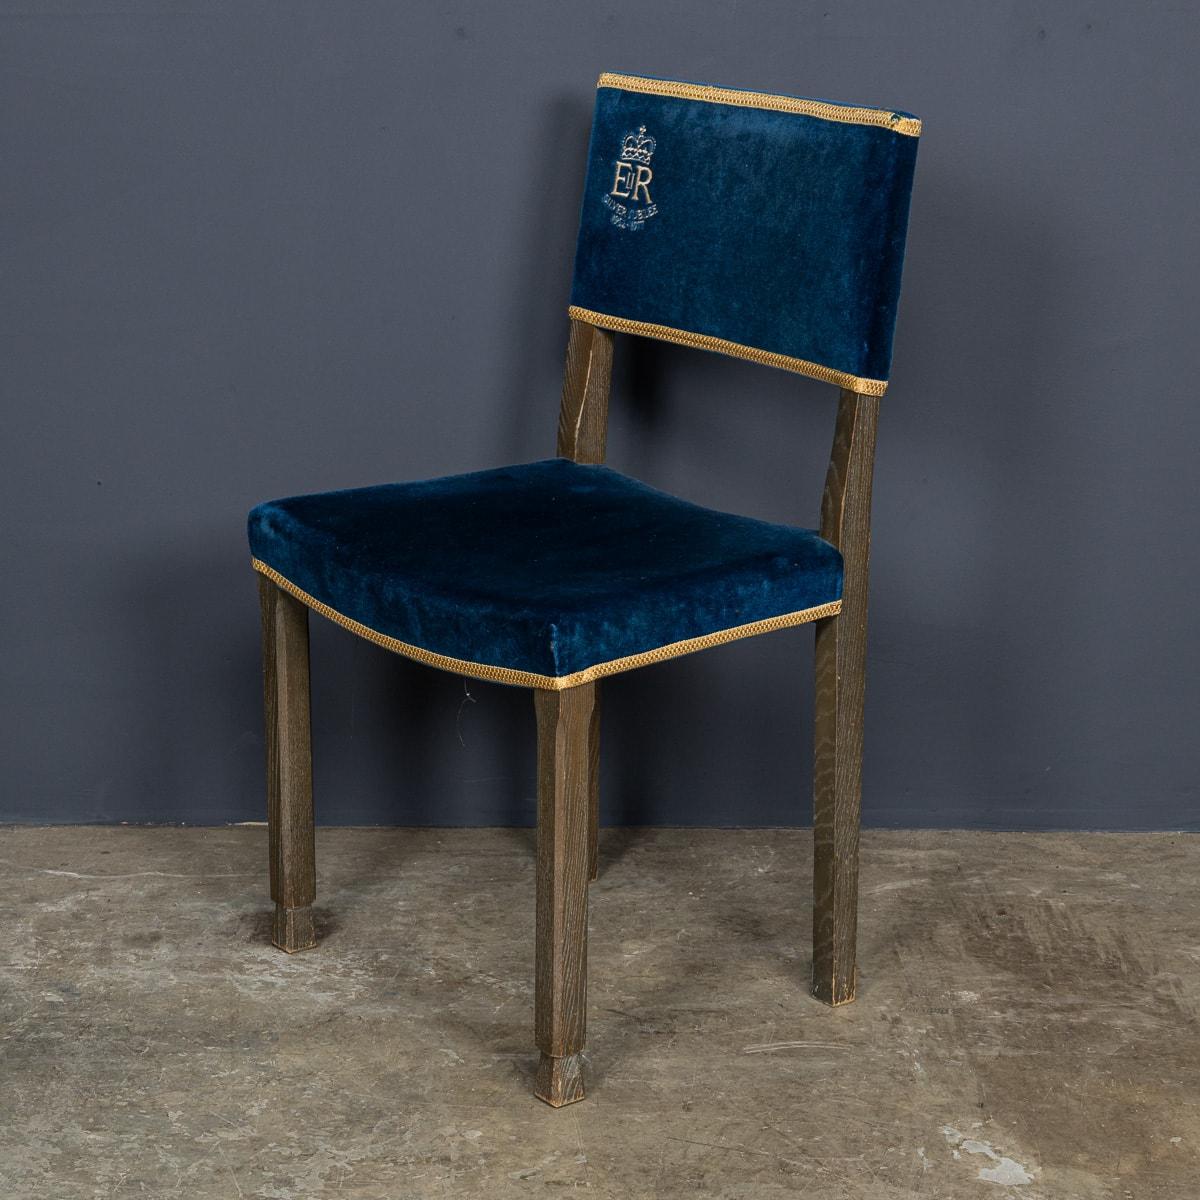 British Set Of Four Silver Jubilee Commemorative Chairs By Hands Of Wycombe c.1977 For Sale